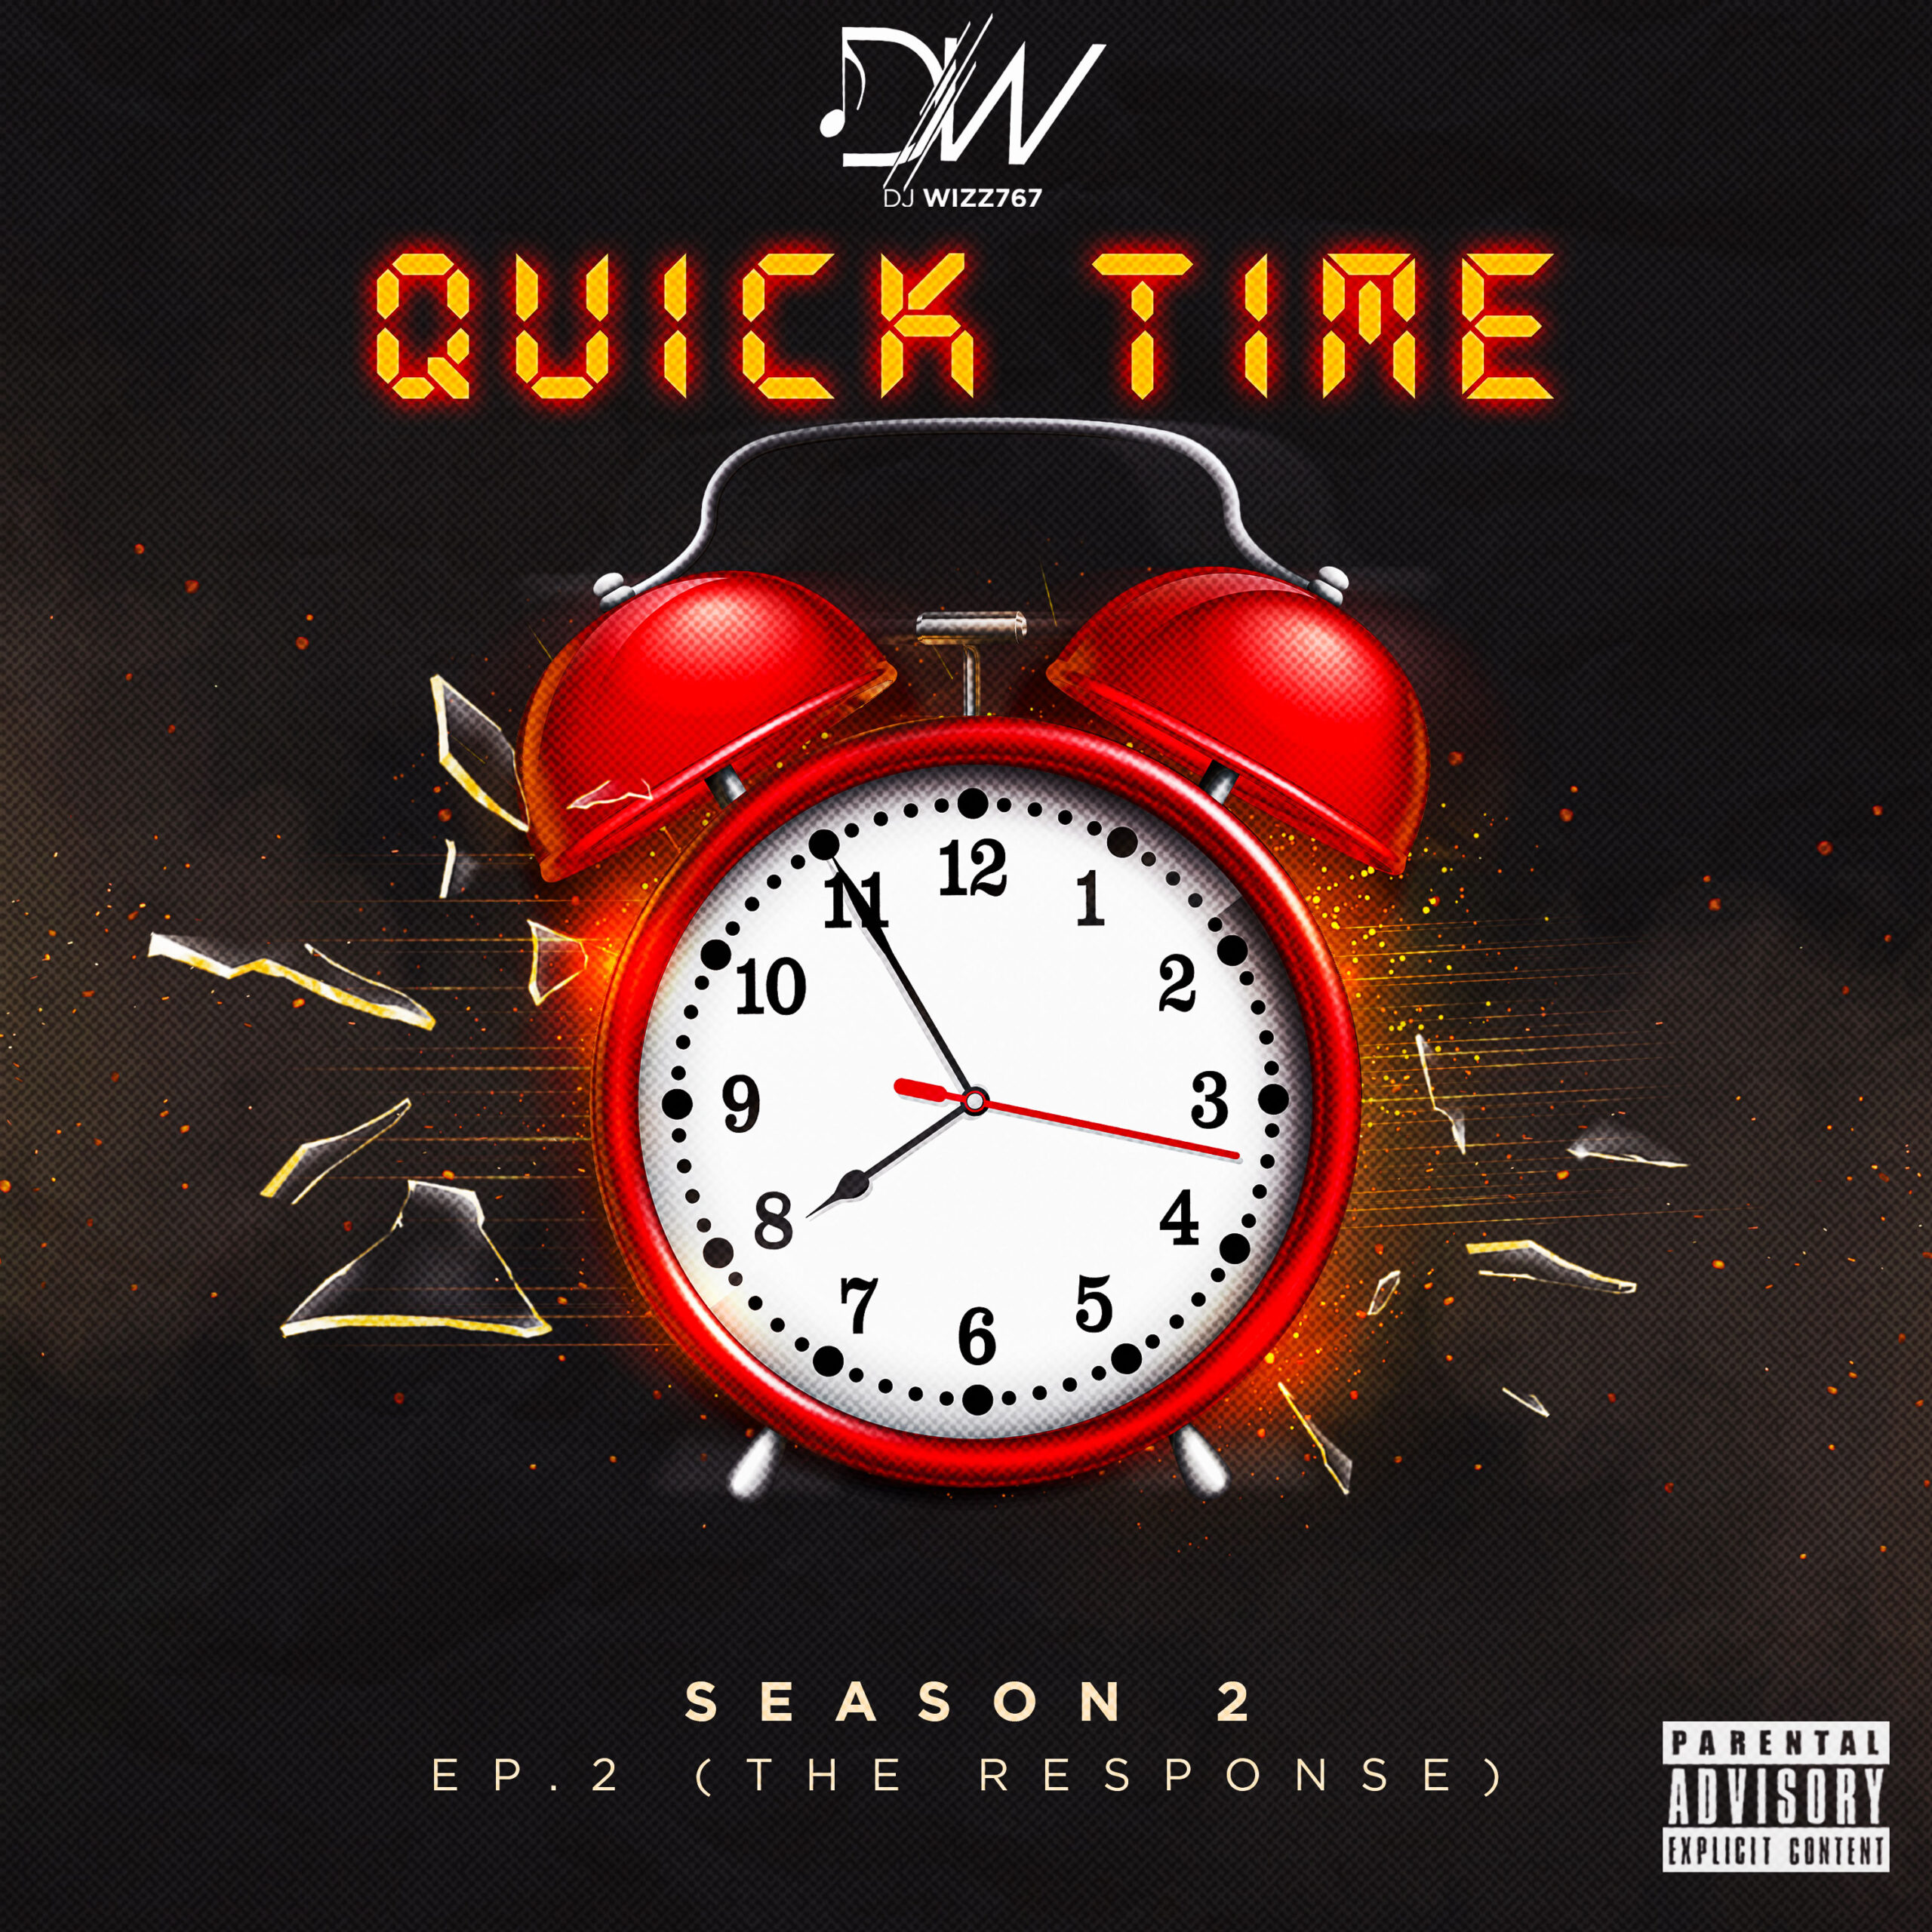 Dj Wizz767 – QUICK TIME S2 EP.2 (THE RESPONSE)